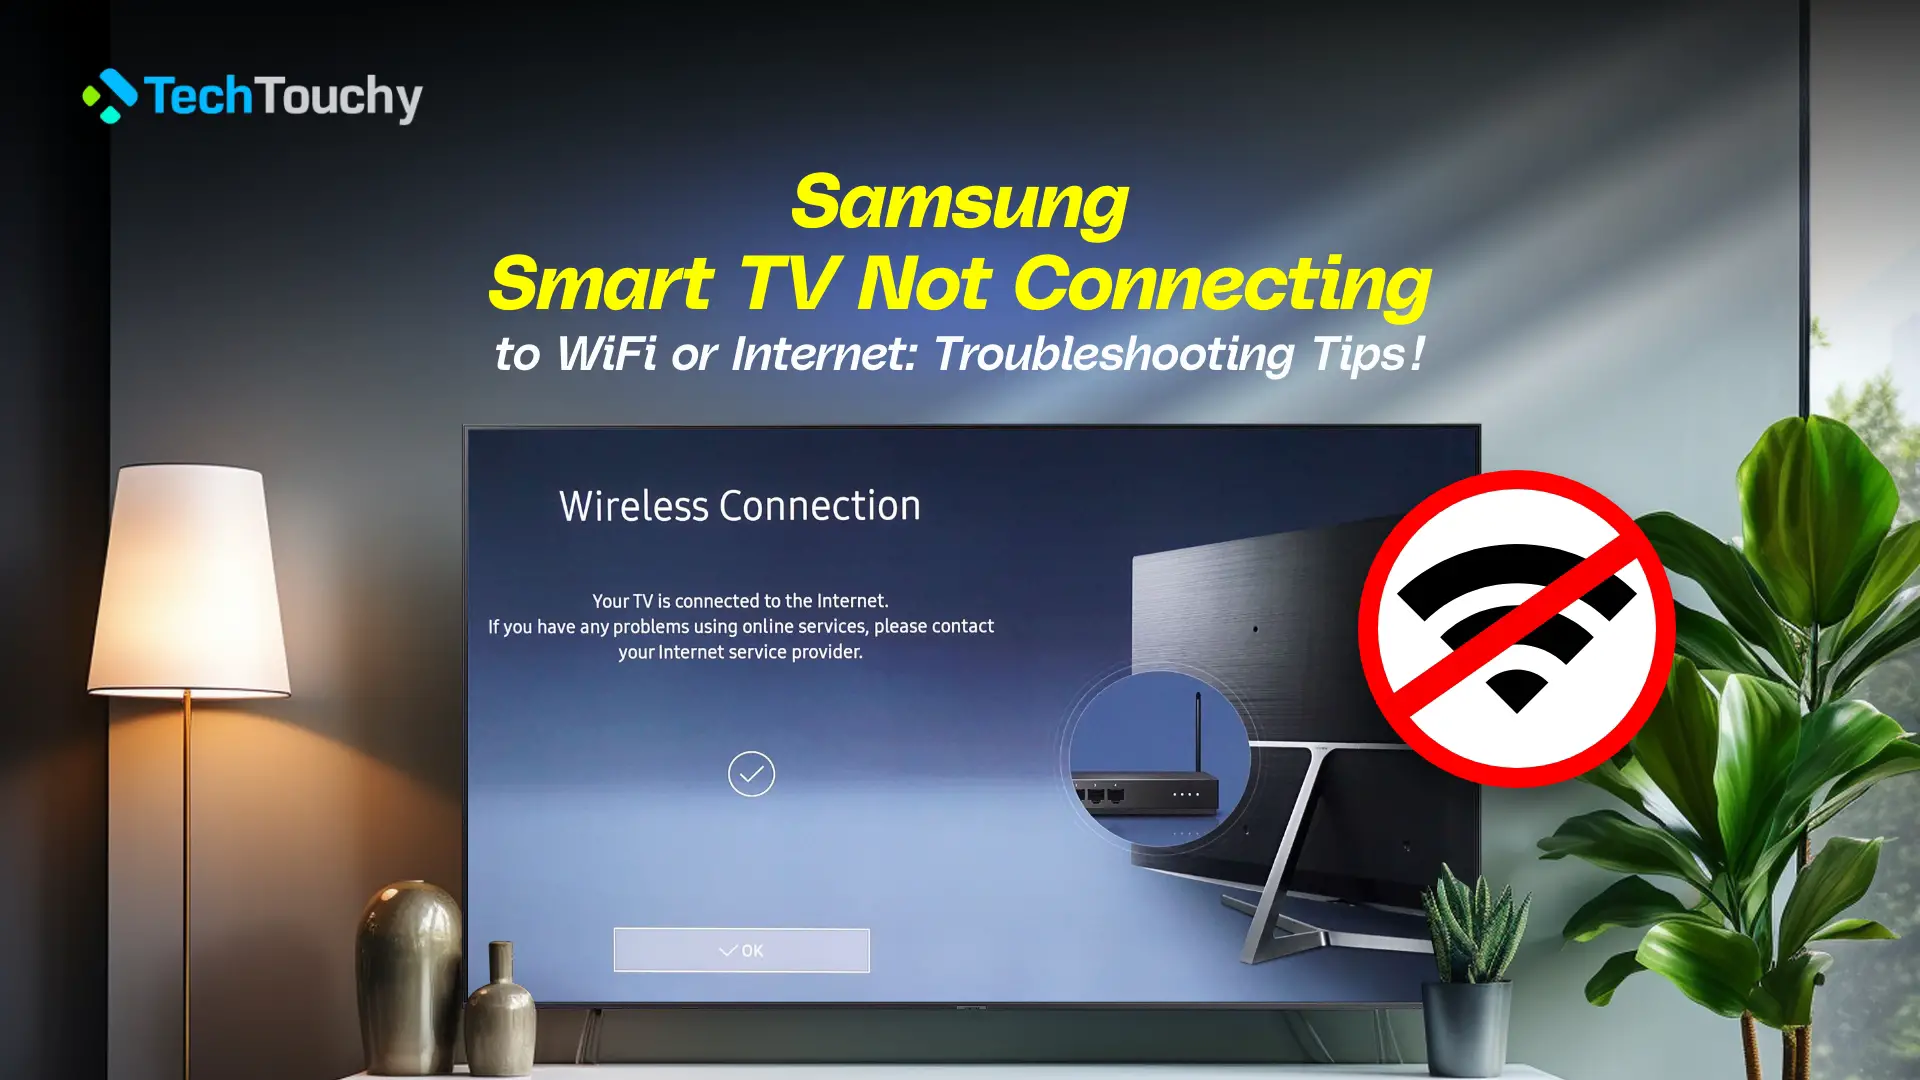 Samsung Smart TV Not Connecting to WiFi or Internet